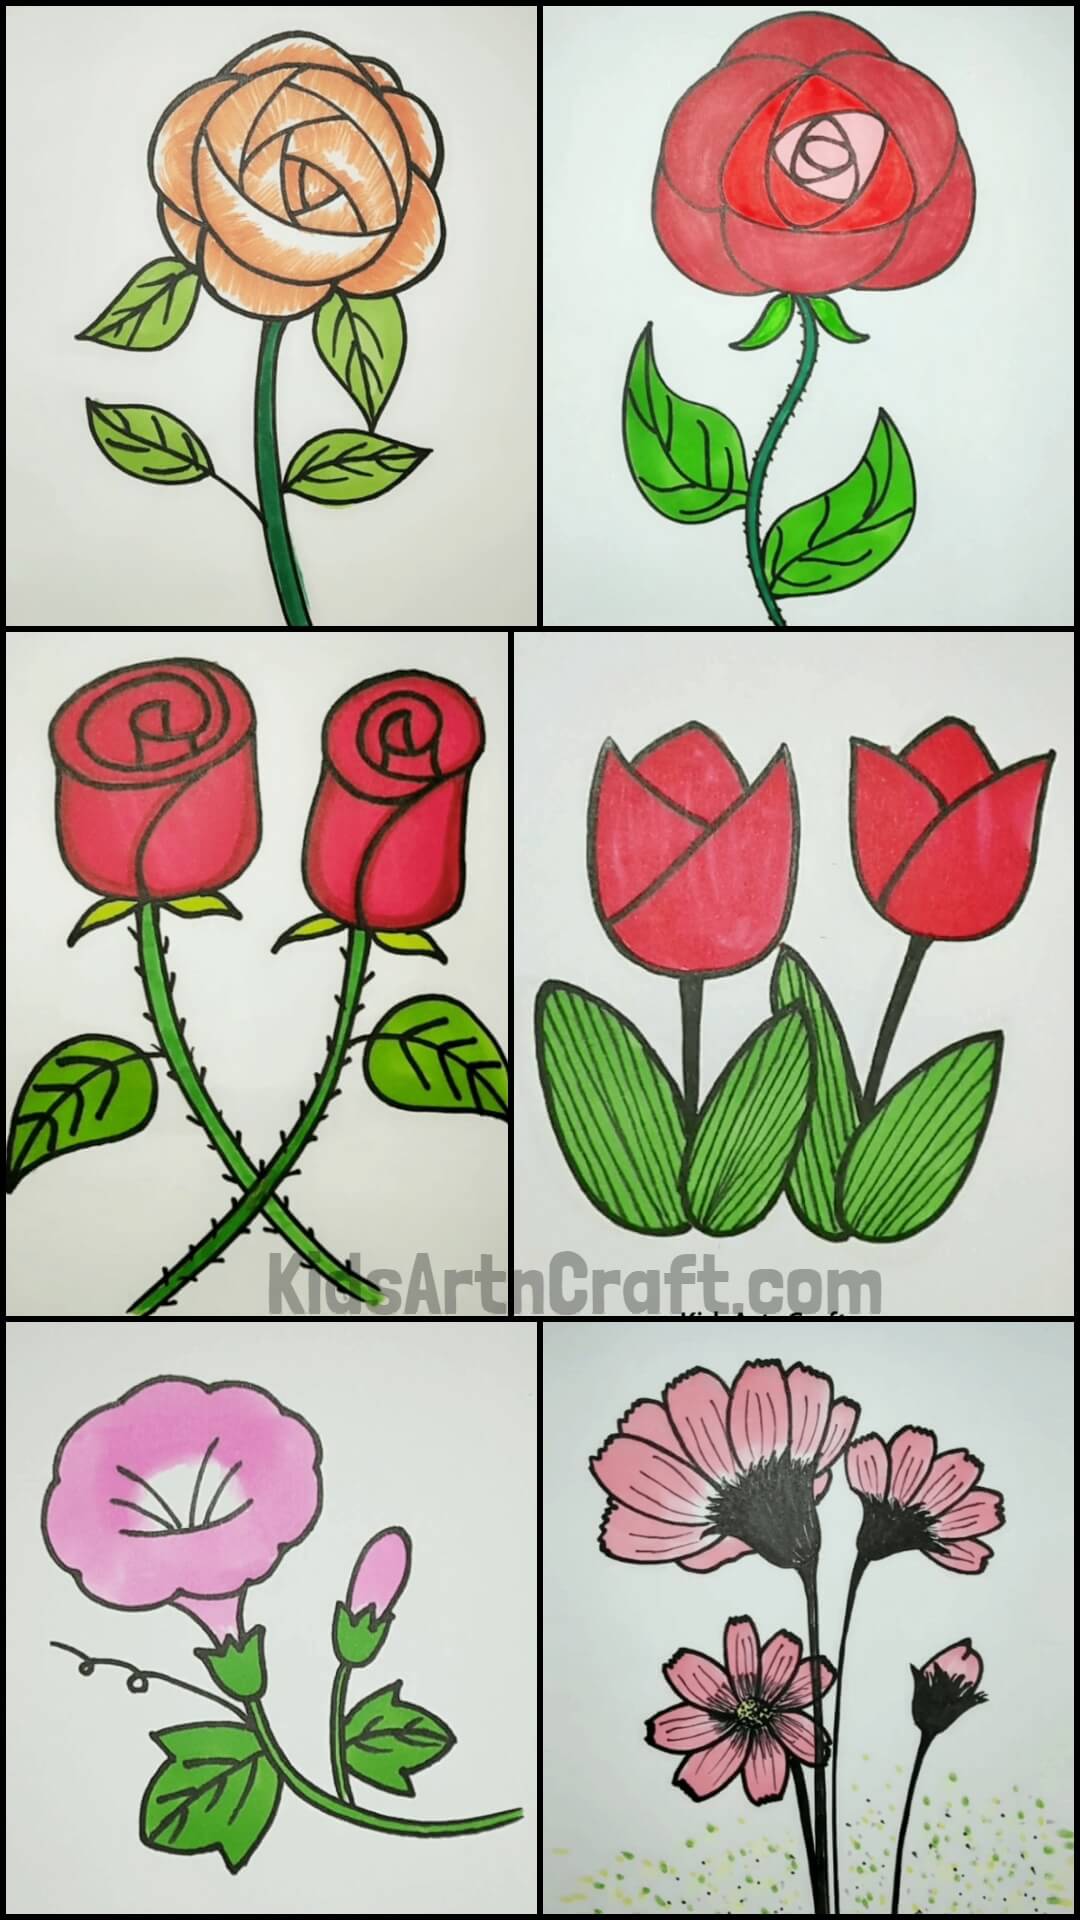 How to Draw a Flower for Kids - Easy Drawing Tutorial